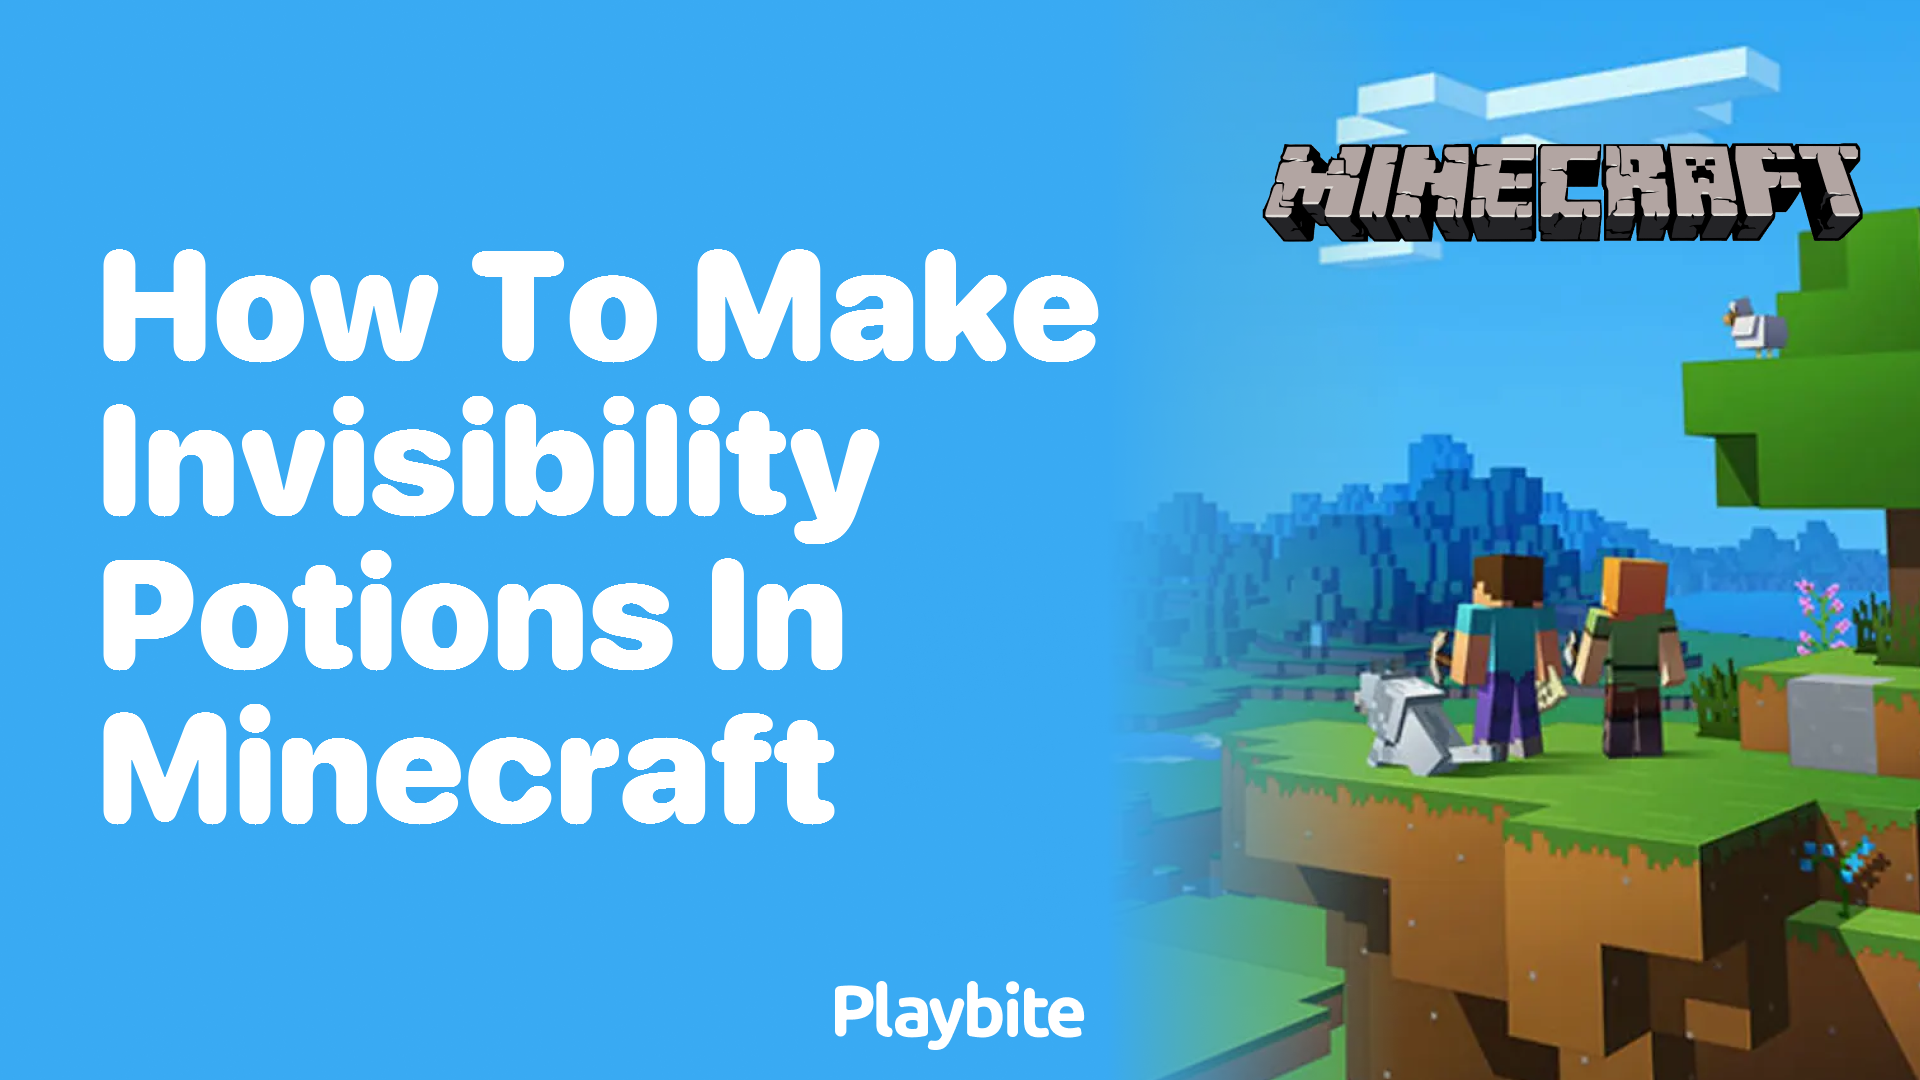 How to Make Invisibility Potions in Minecraft